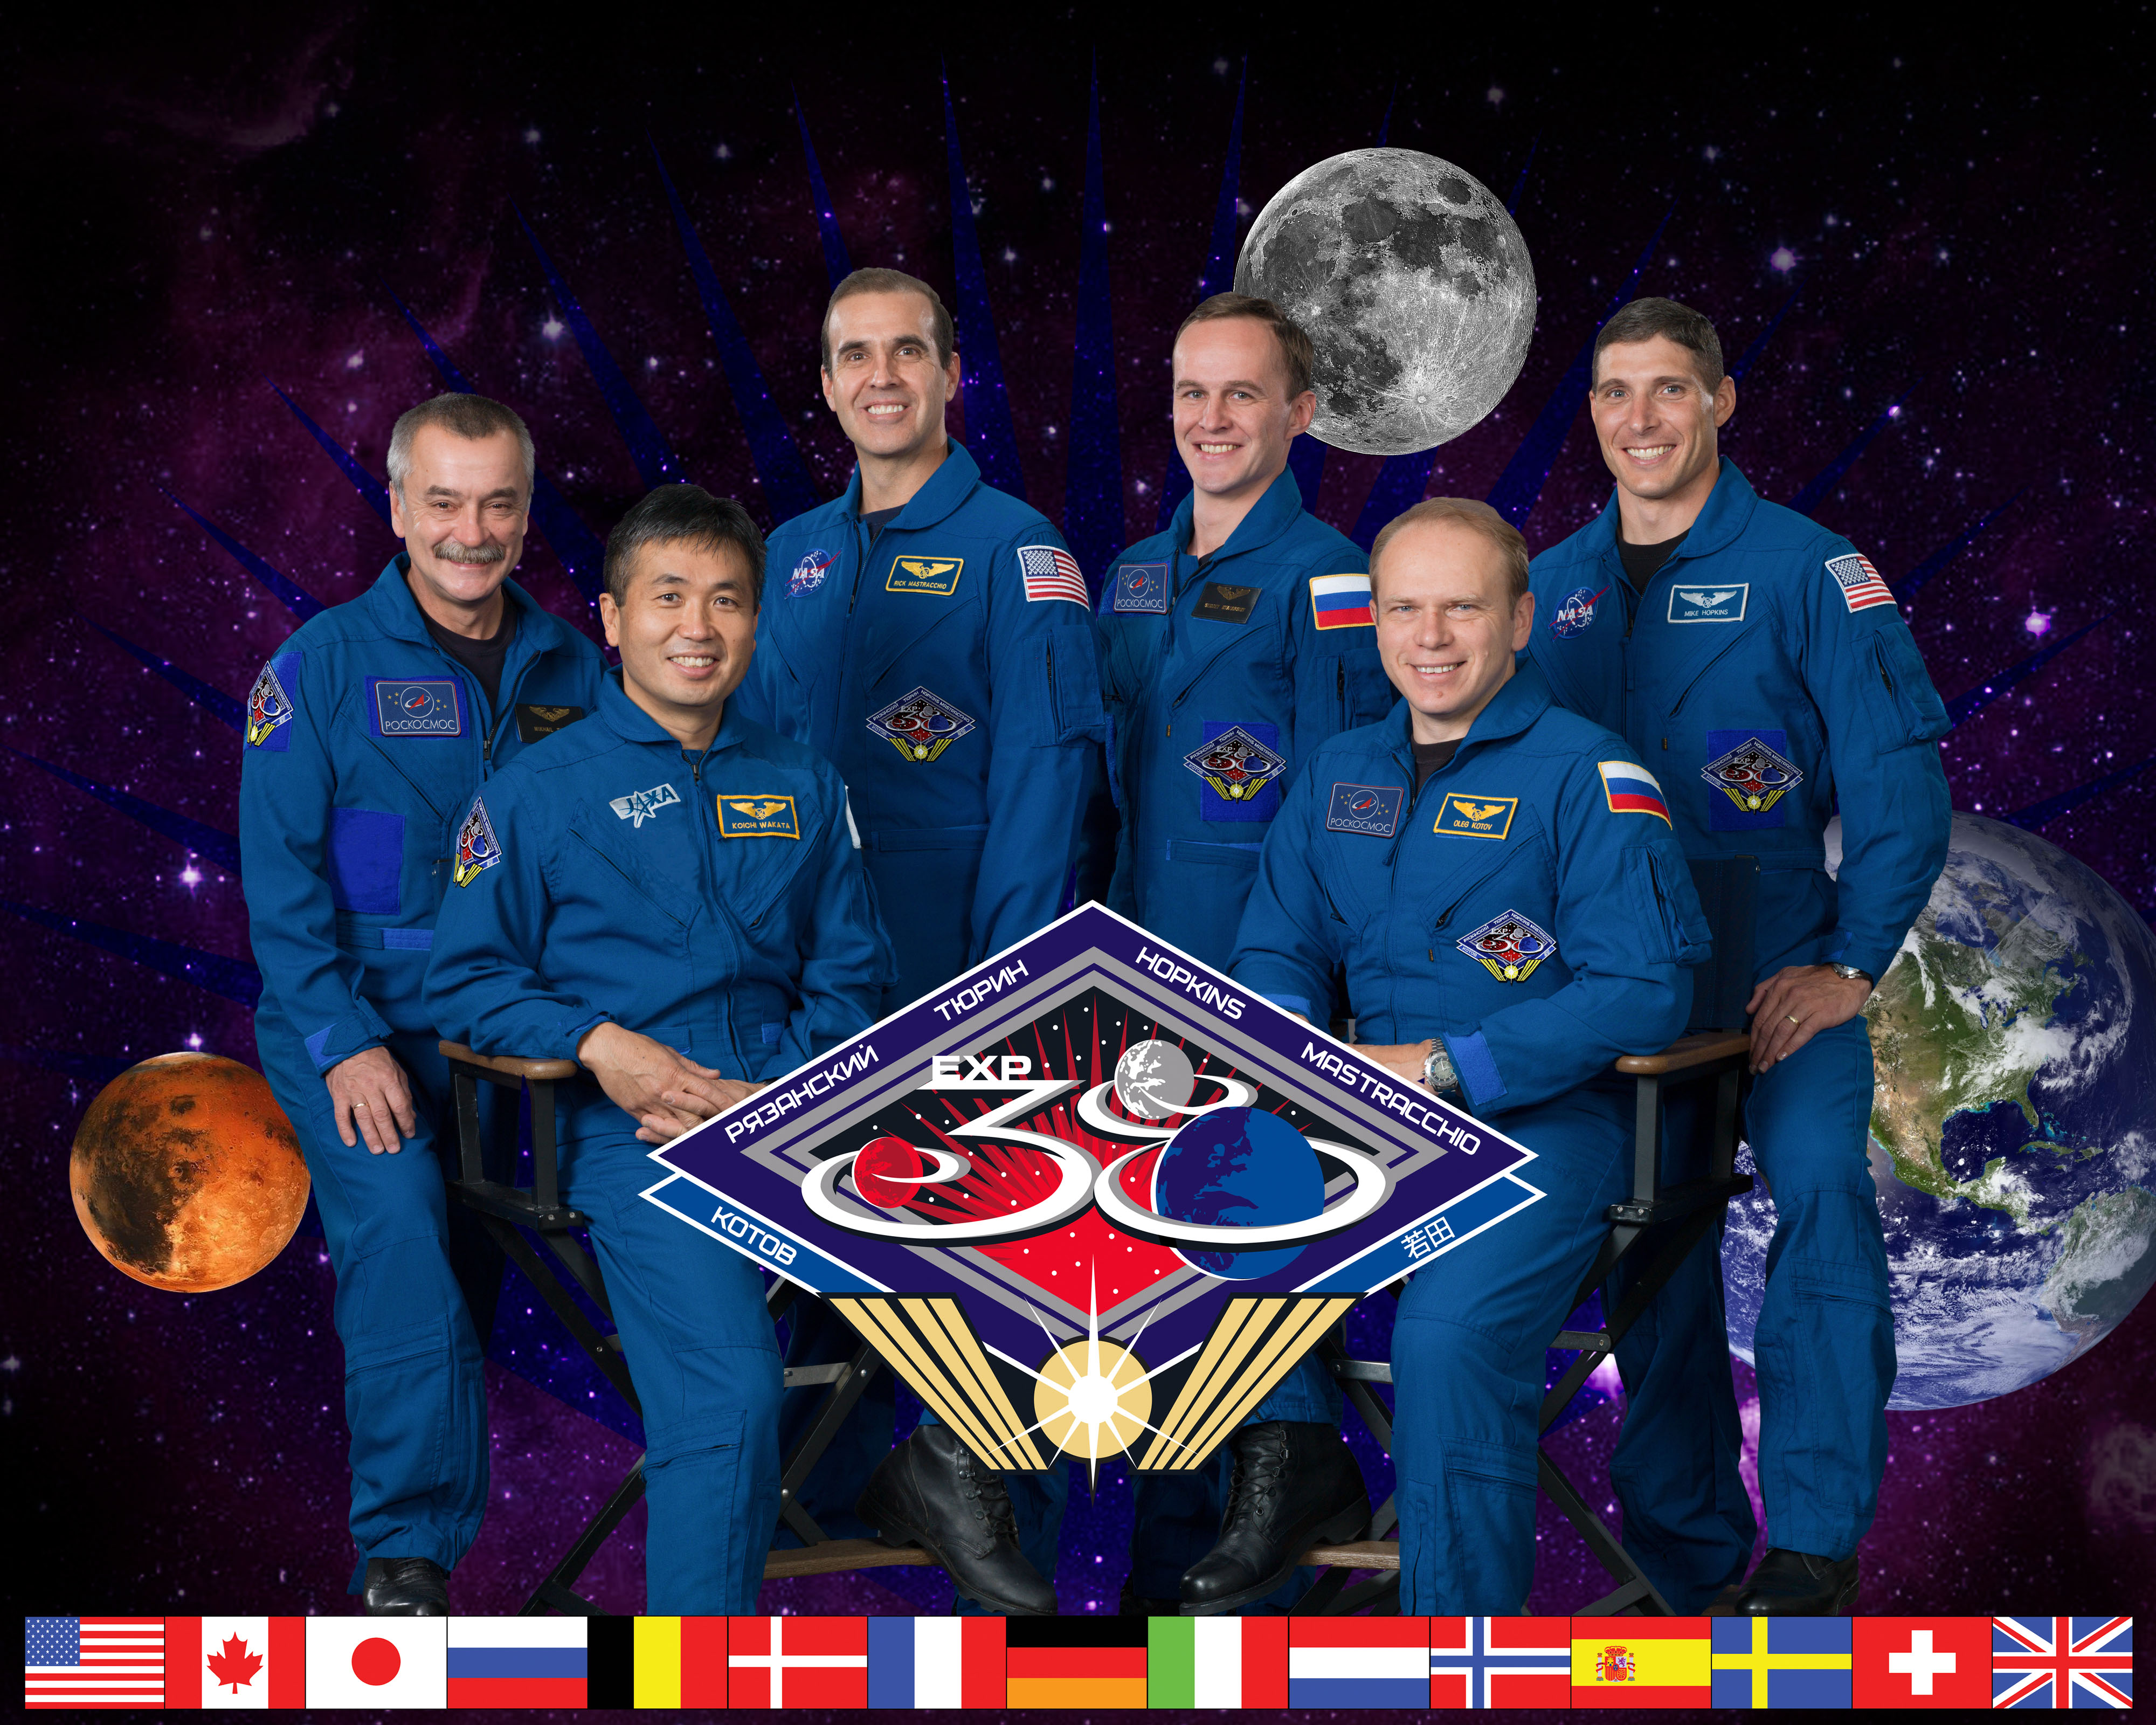 With the departure of Soyuz TMA-09M on 10 November, Expedition 38 will be in effect until mid-March 2014. In command will be Oleg Kotov (seated right). Seated left is Koichi Wakata, with (from left) Mikhail Tyurin, Rick Mastracchio, Sergei Ryazansky and Mike Hopkins standing. Photo Credit: NASA